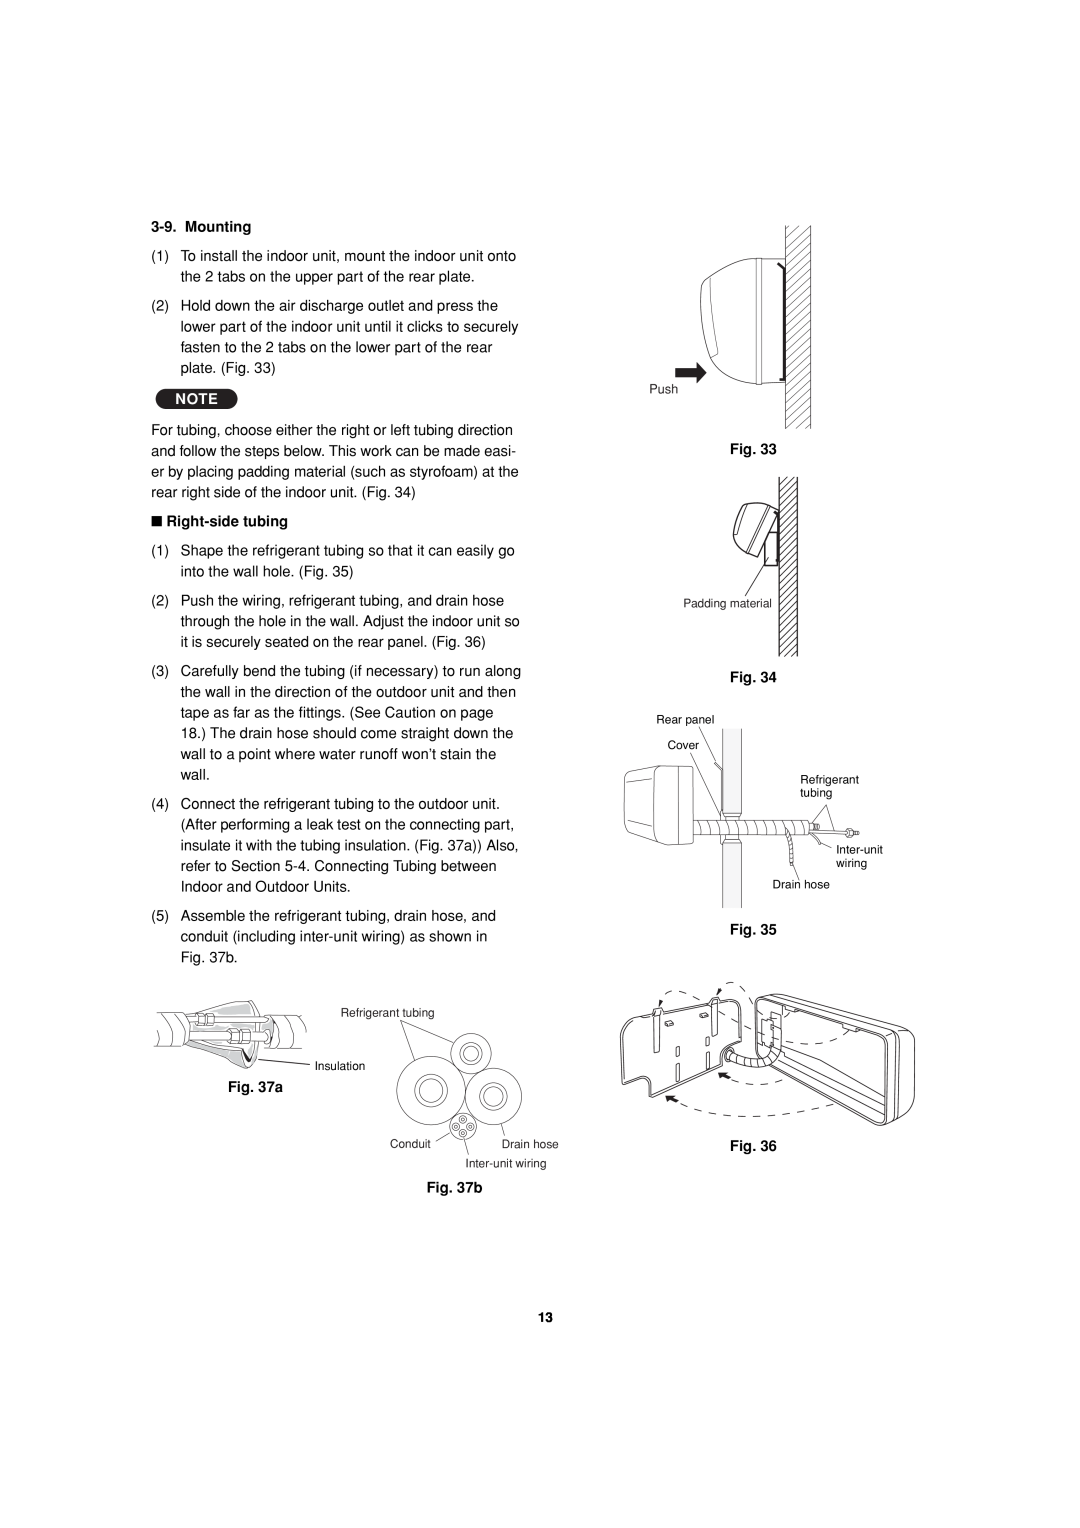 Sanyo CH1872, CH2472 service manual Mounting, Right-sidetubing, Fig. Fig, Push 